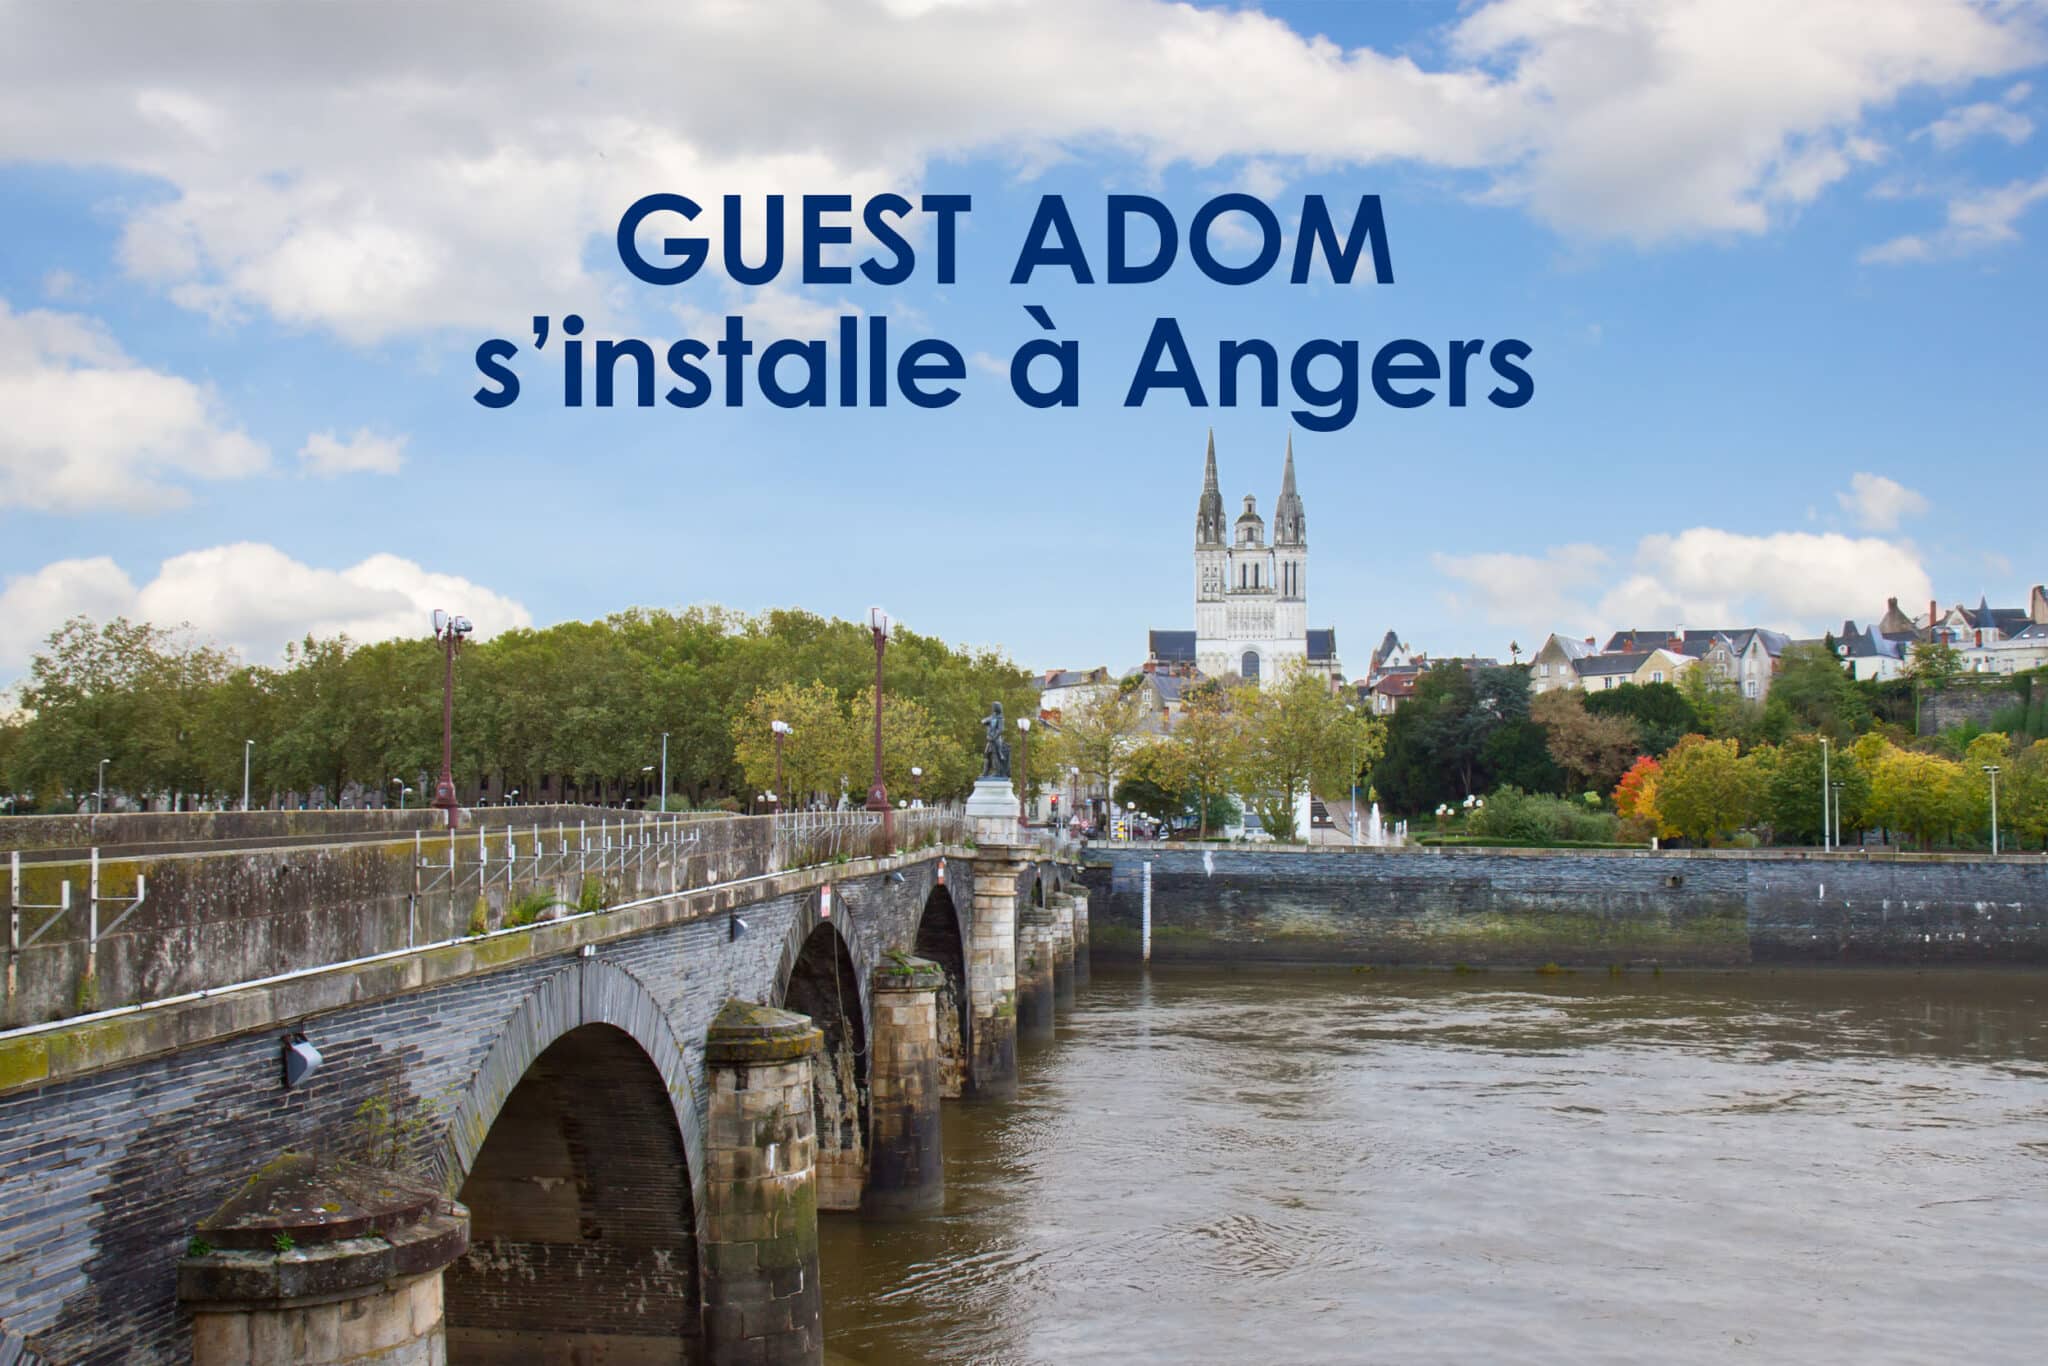 GUEST ADOM s'installe à Angers - BLOG